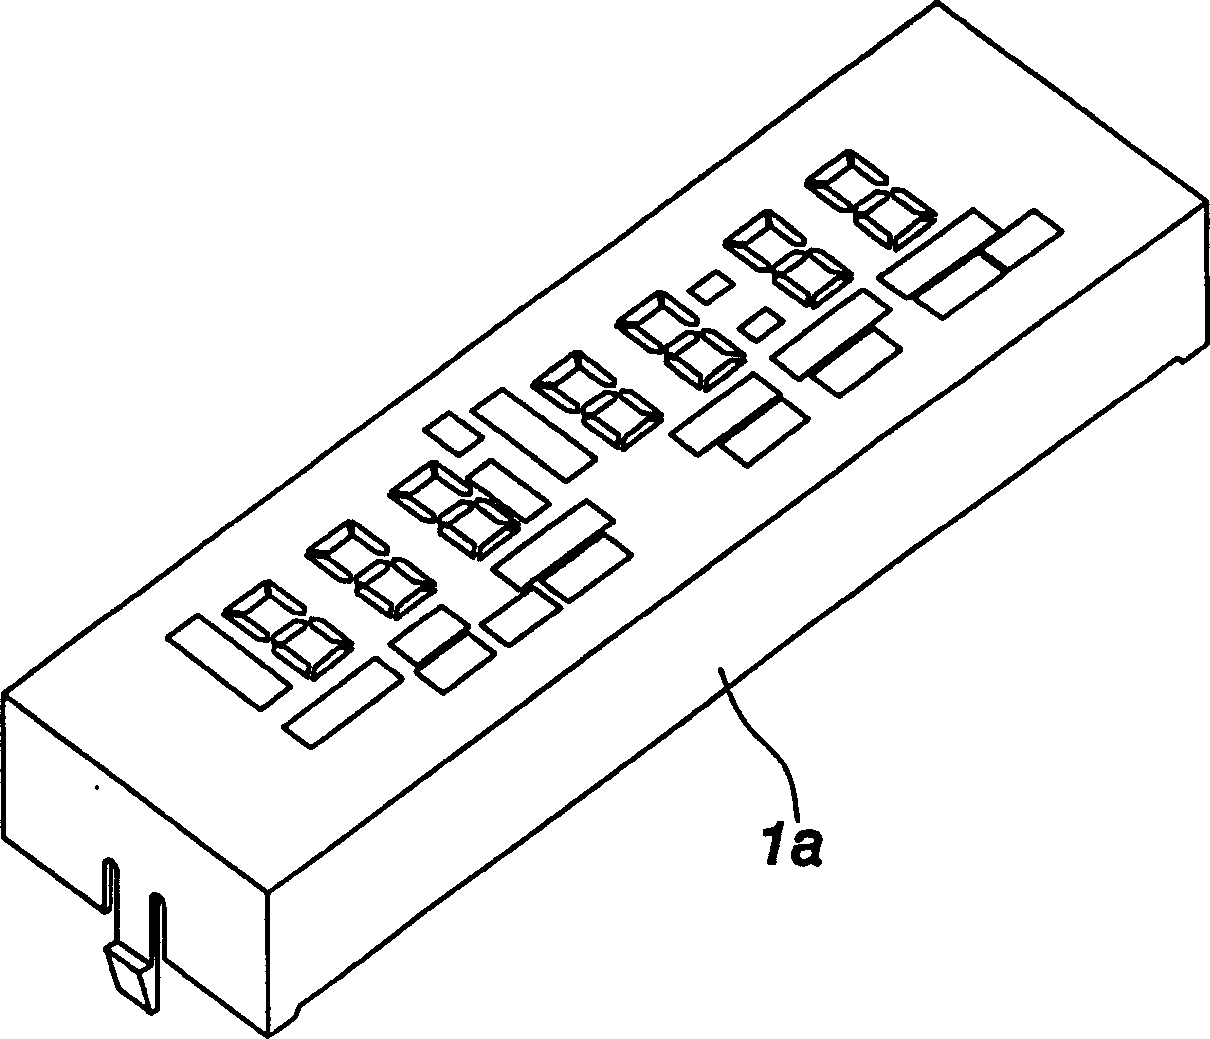 Process for producing color display